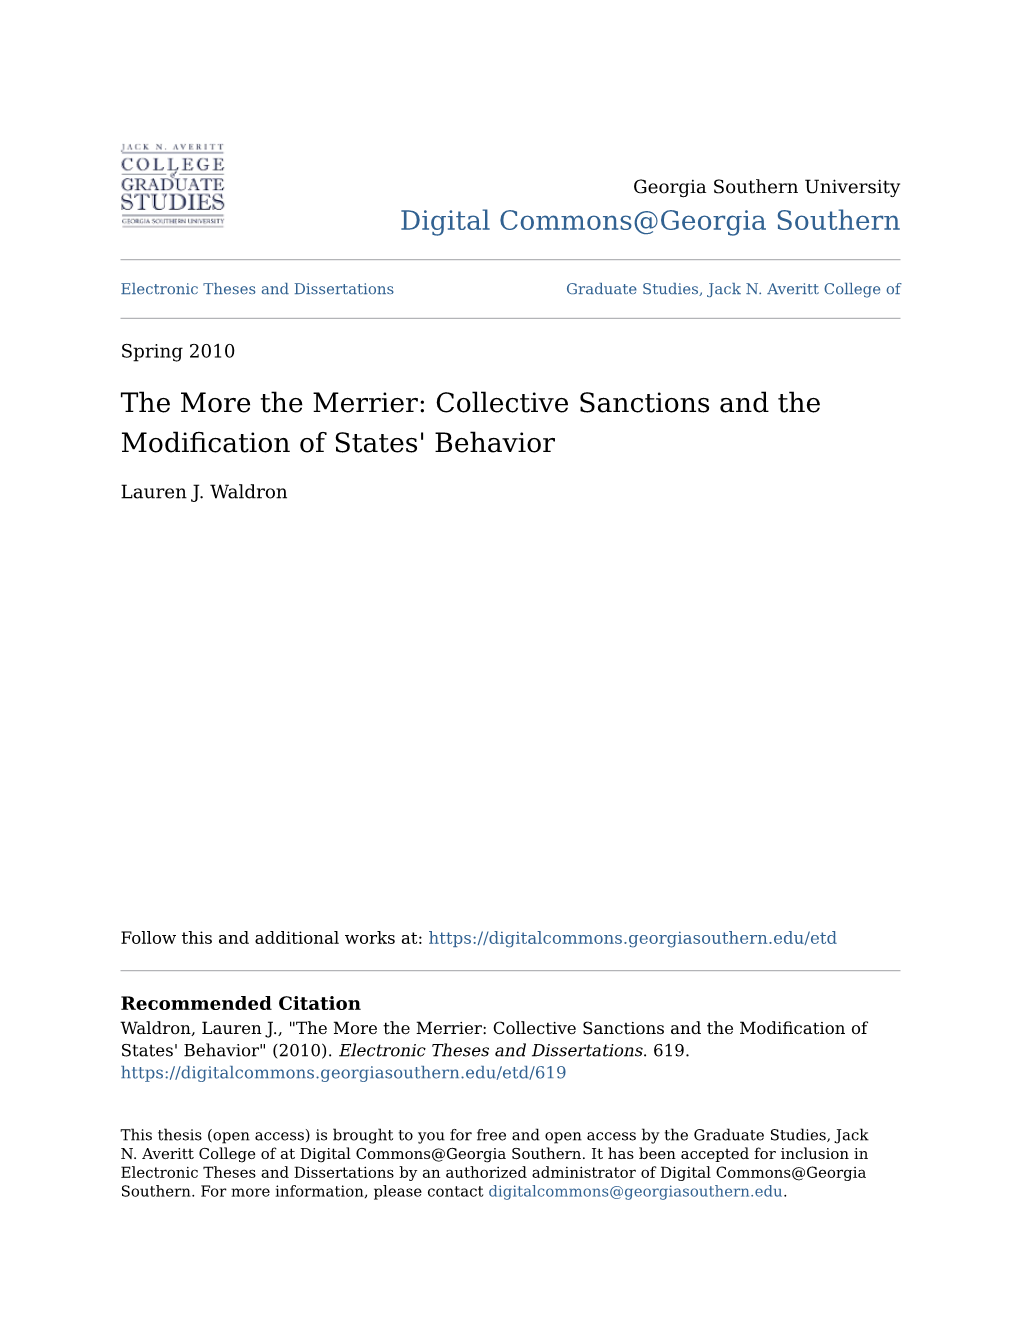 Collective Sanctions and the Modification of States' Behavior